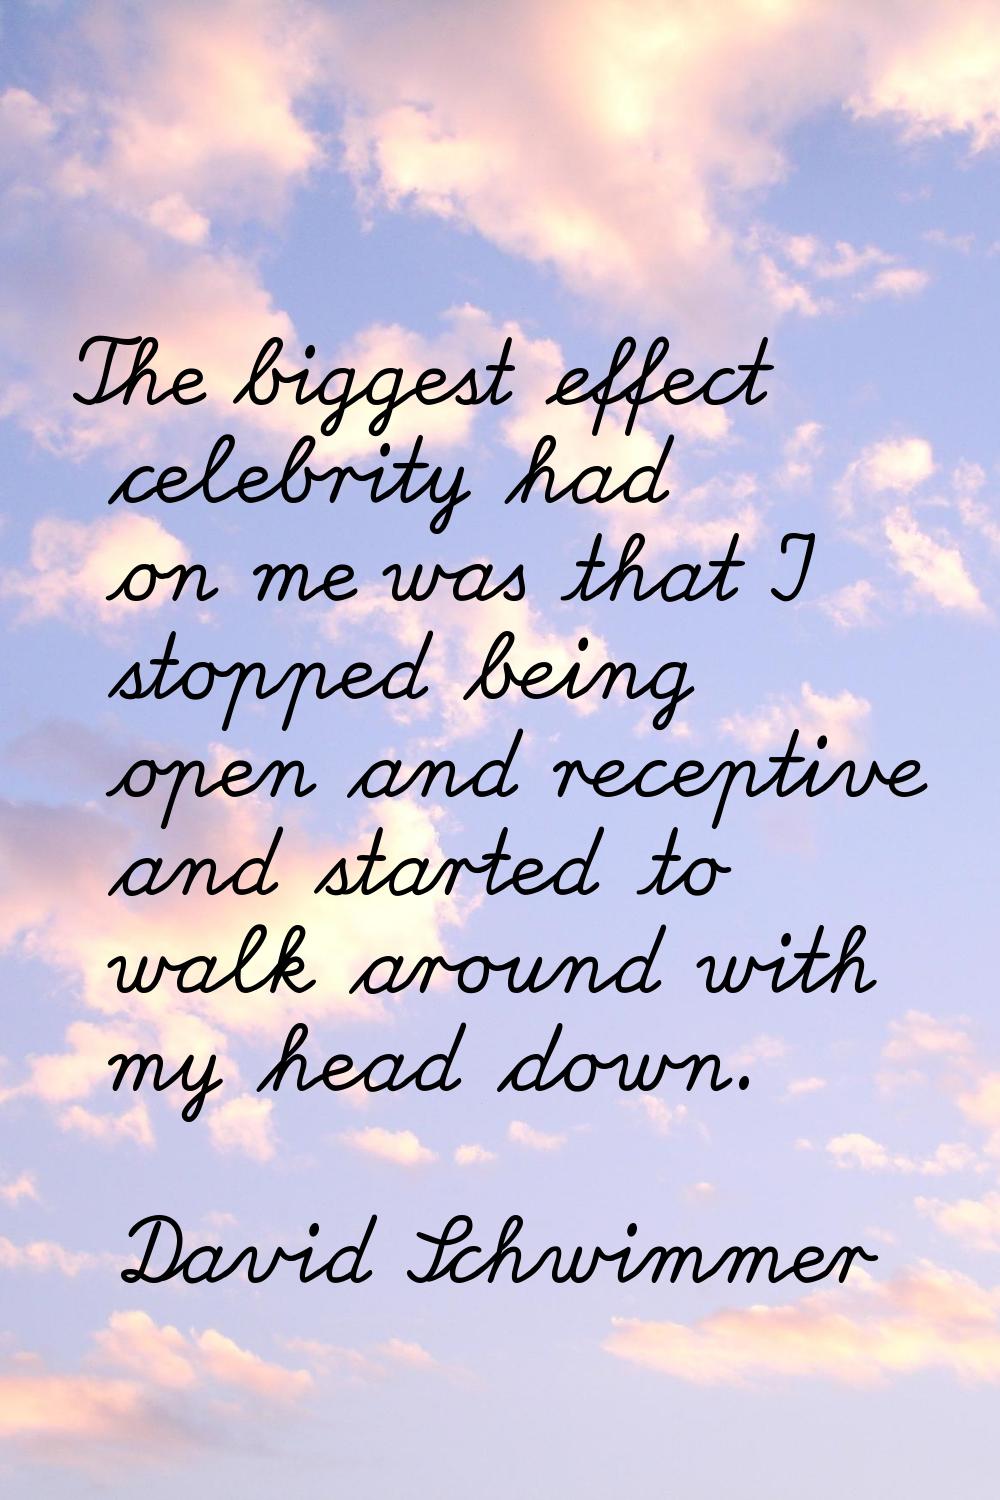 The biggest effect celebrity had on me was that I stopped being open and receptive and started to w